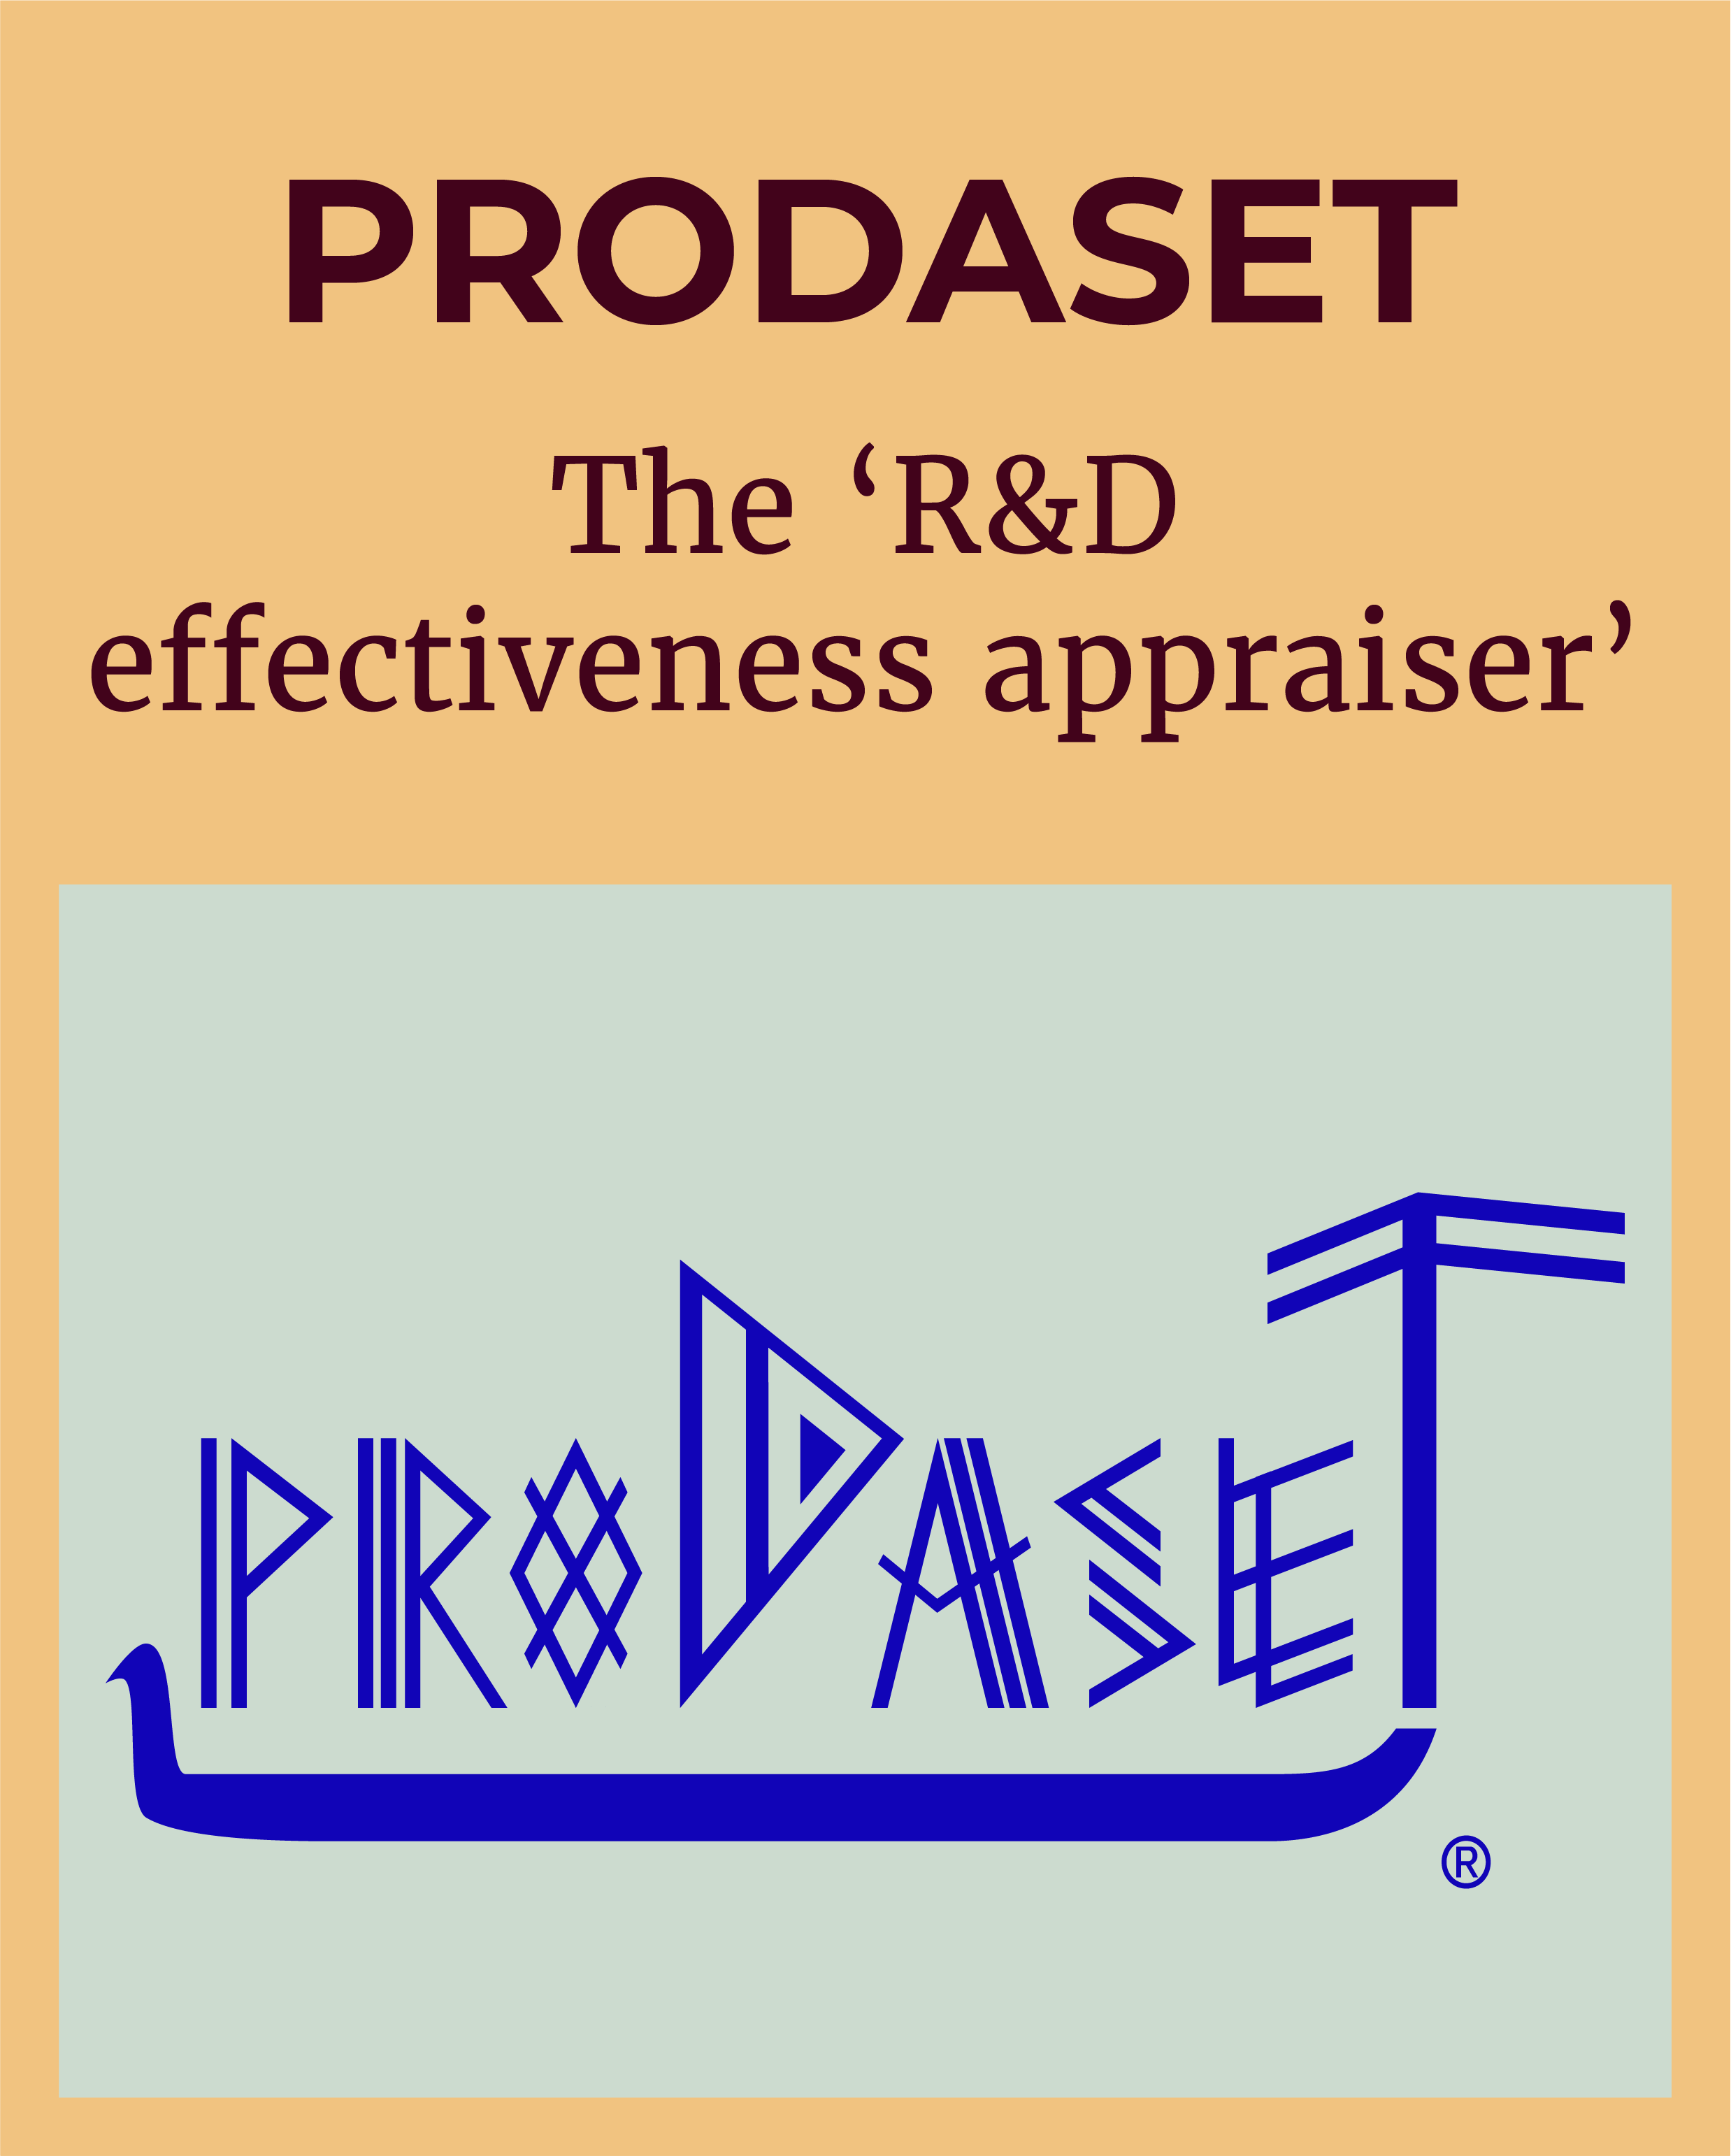 Logo of PRODASET - the research product that is the 'R&D effectiveness appraiser'